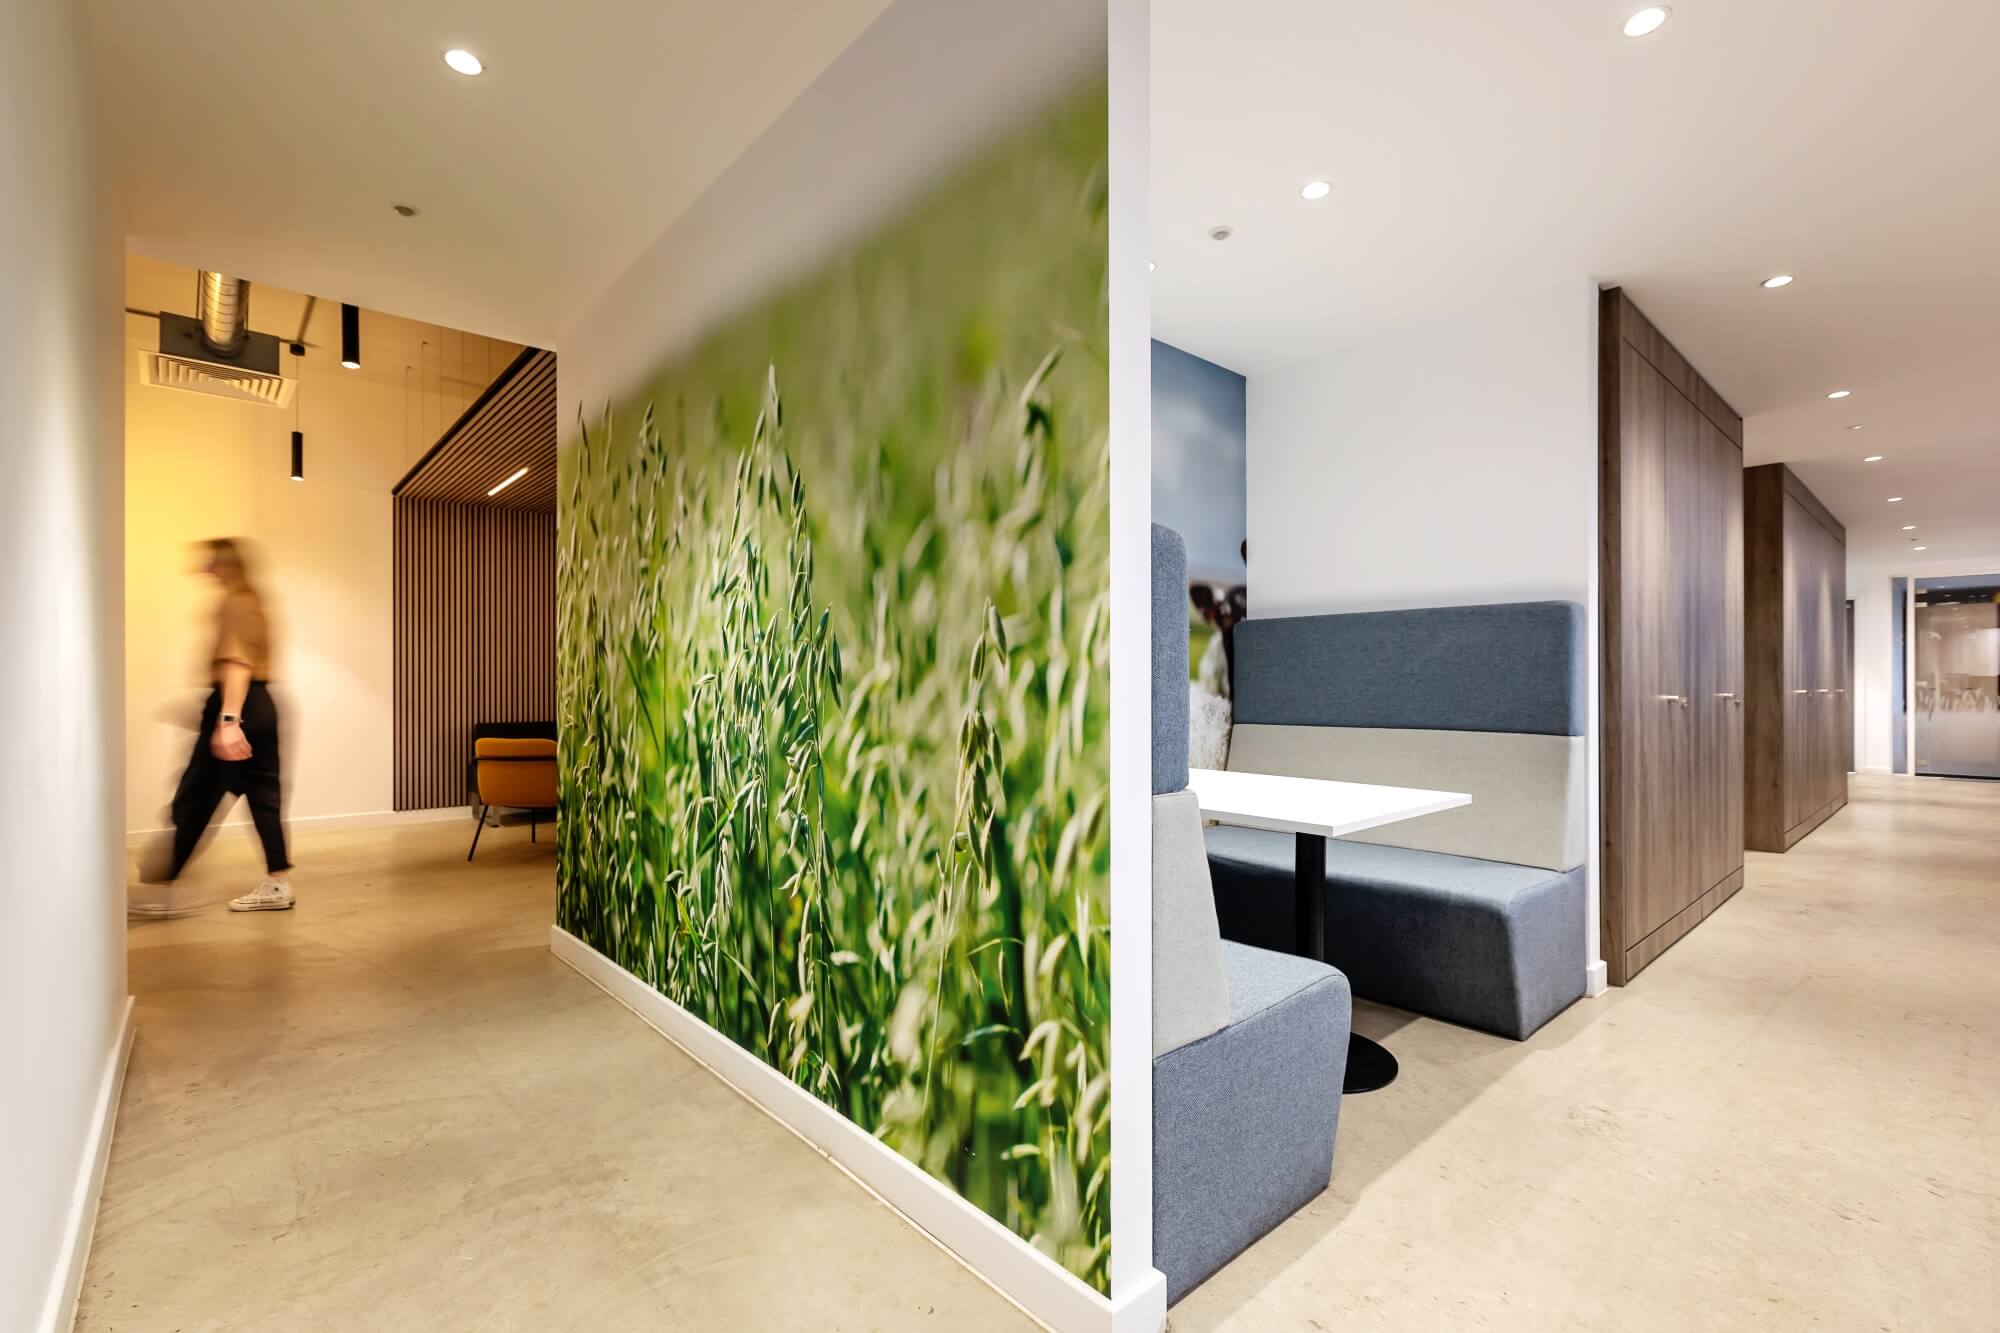 Office Design With Wall Graphics